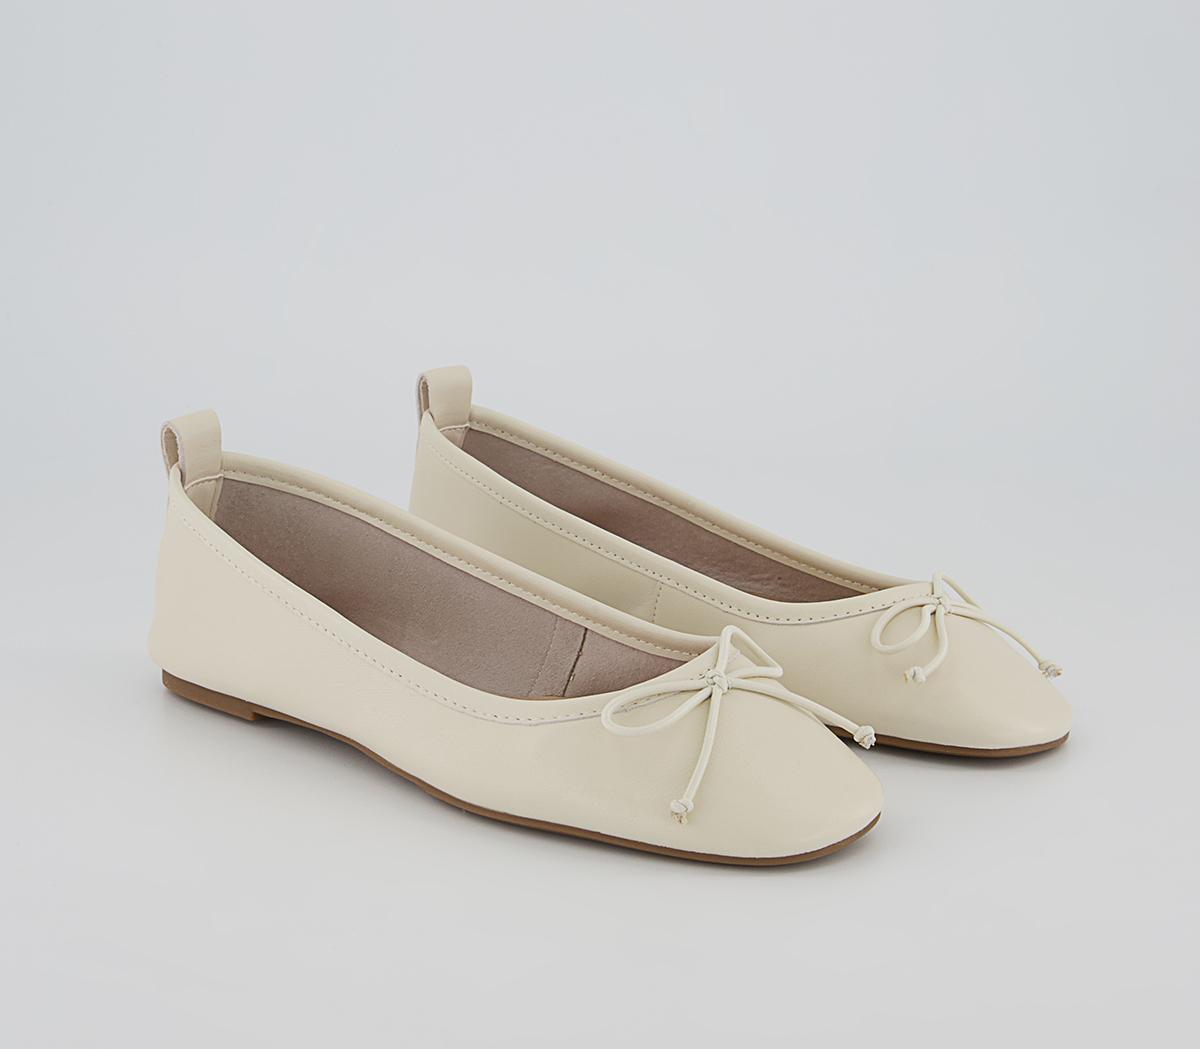 OFFICE Womens Feared Bow Ballet Shoes Off White Leather, 9